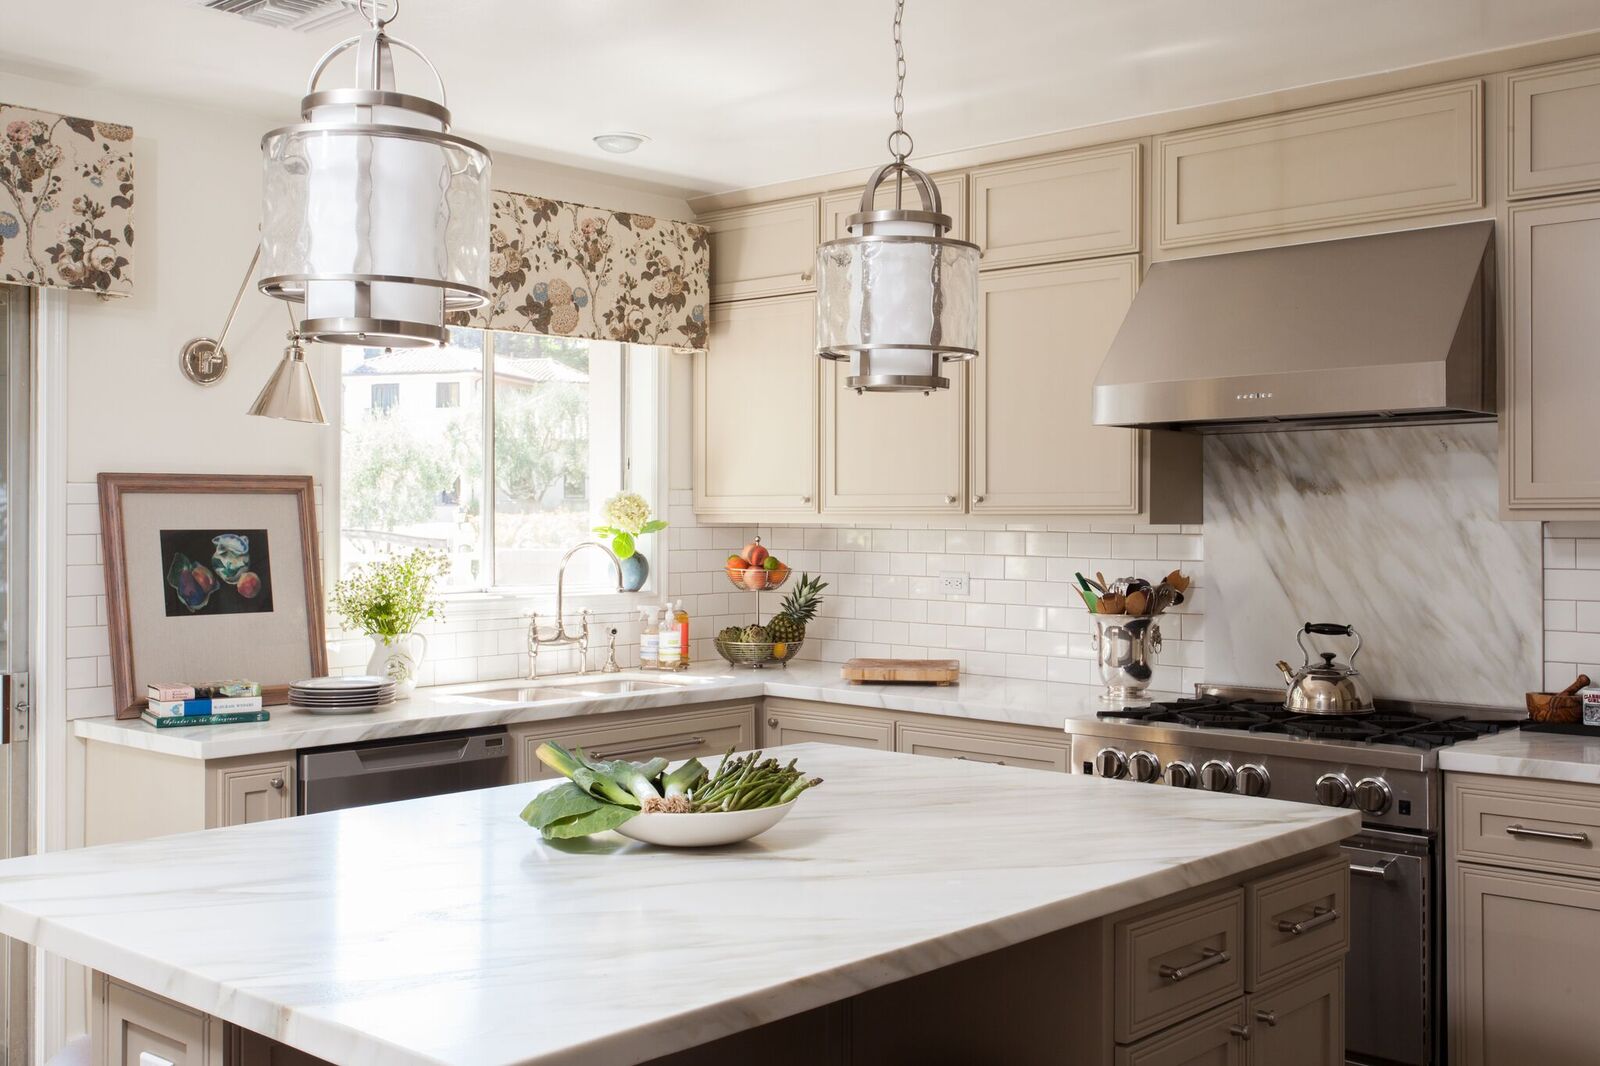 Muted neutral painted cabinets and more 2019 design trends for your home.